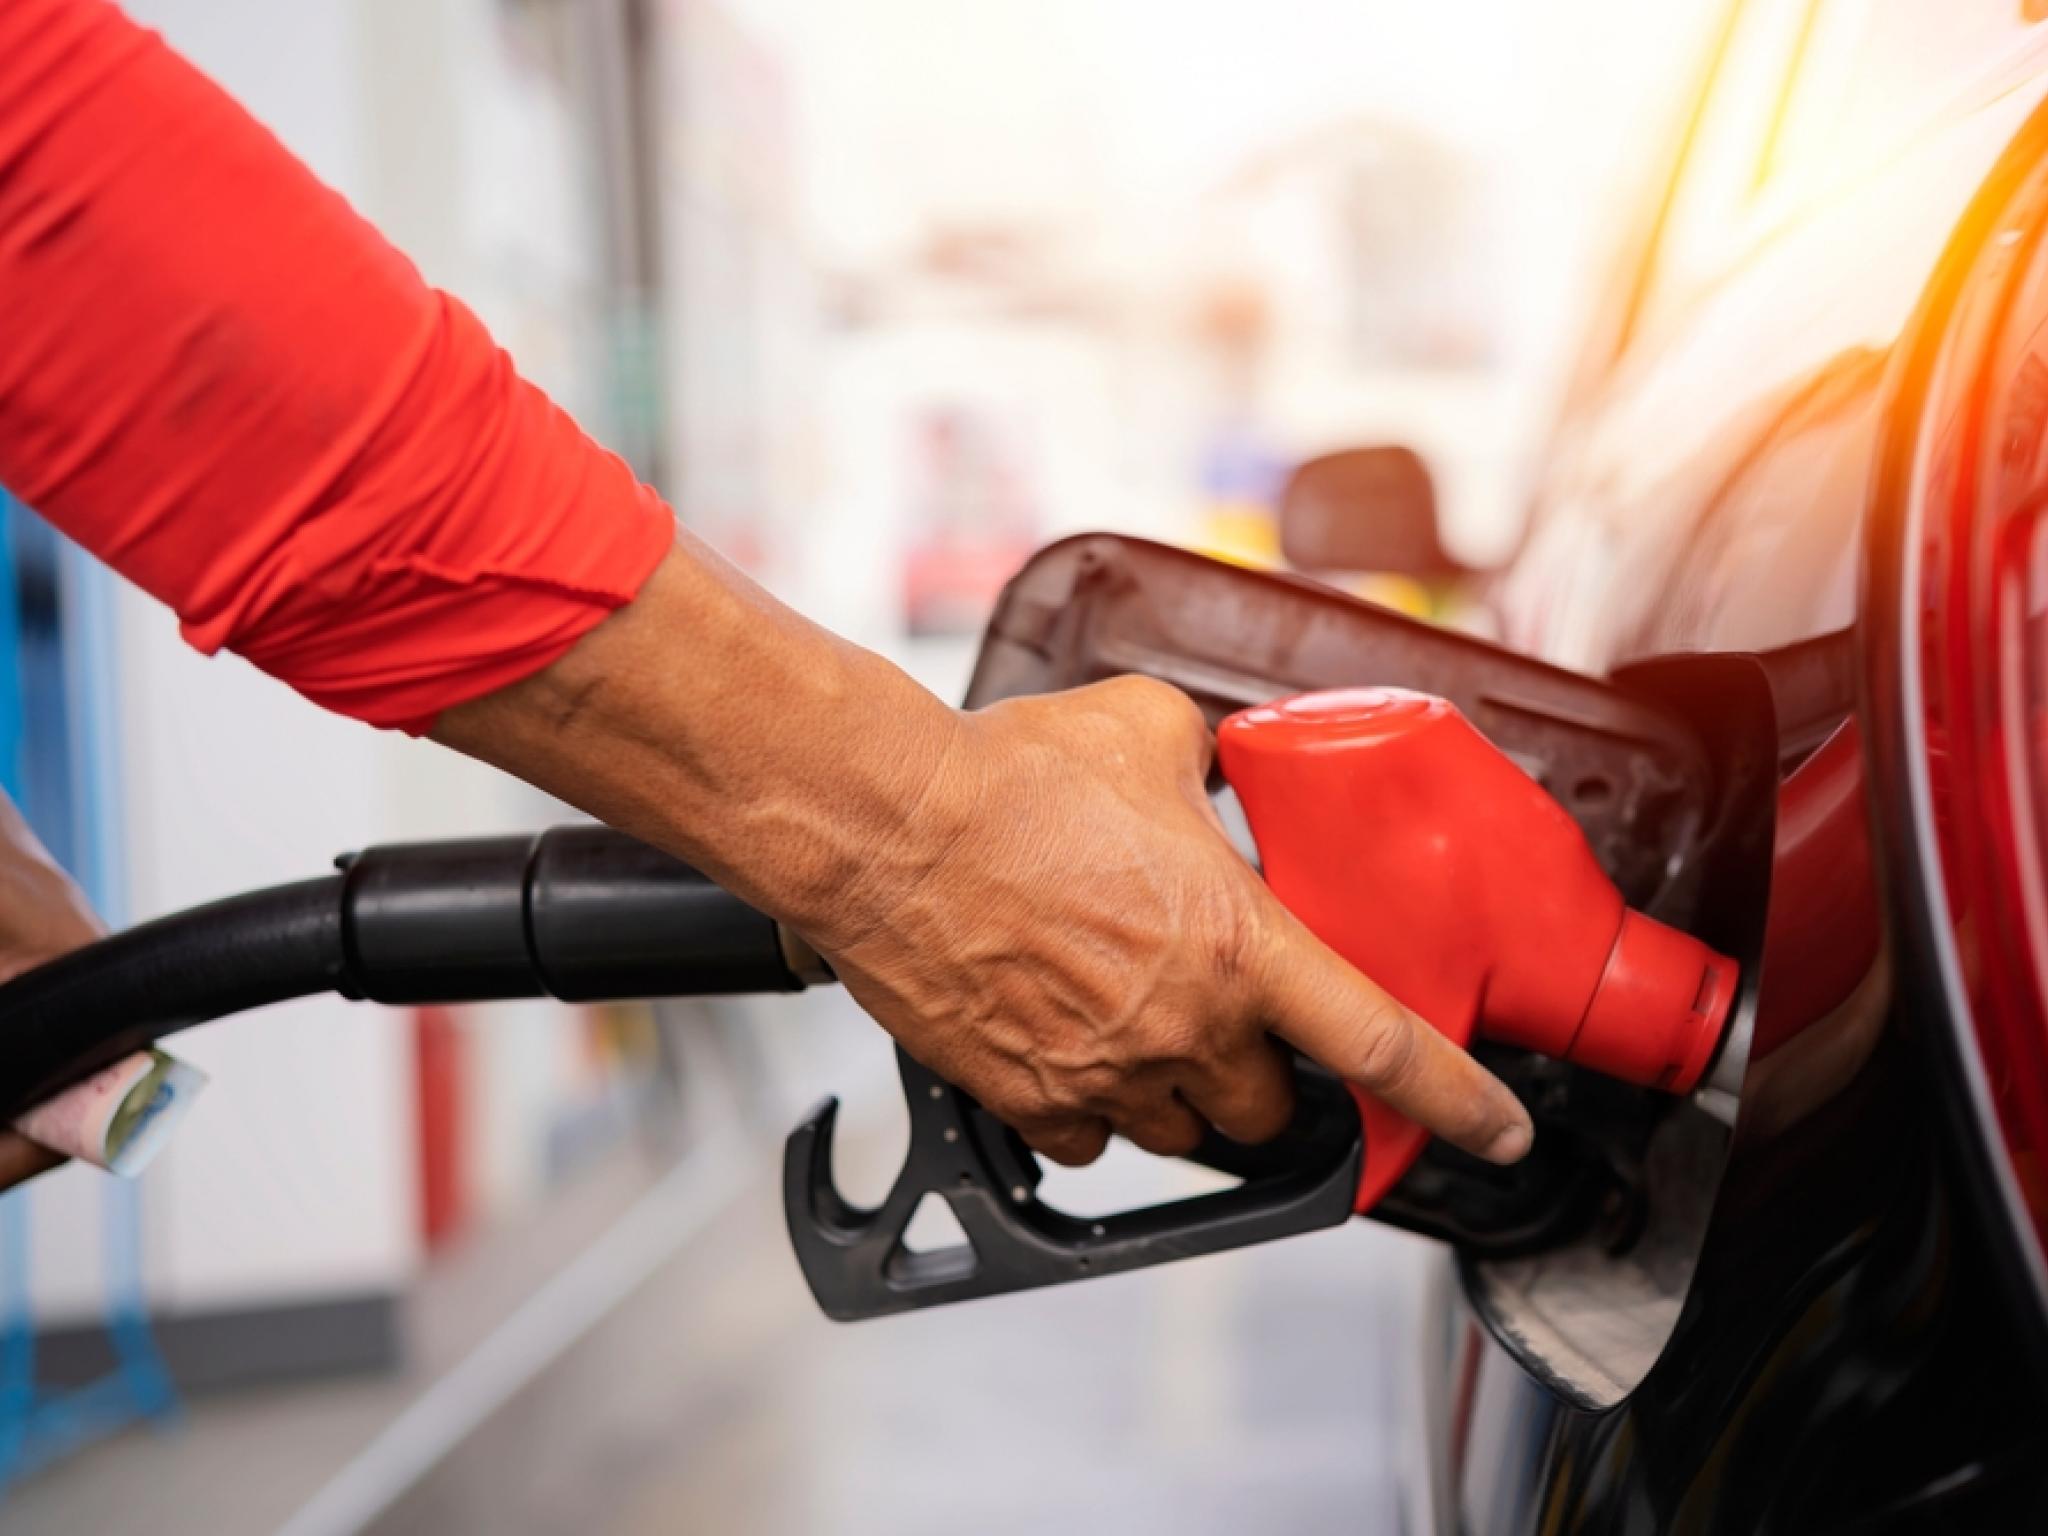  gasoline-pump-prices-near-1-year-high-is-this-an-inflationary-threat 